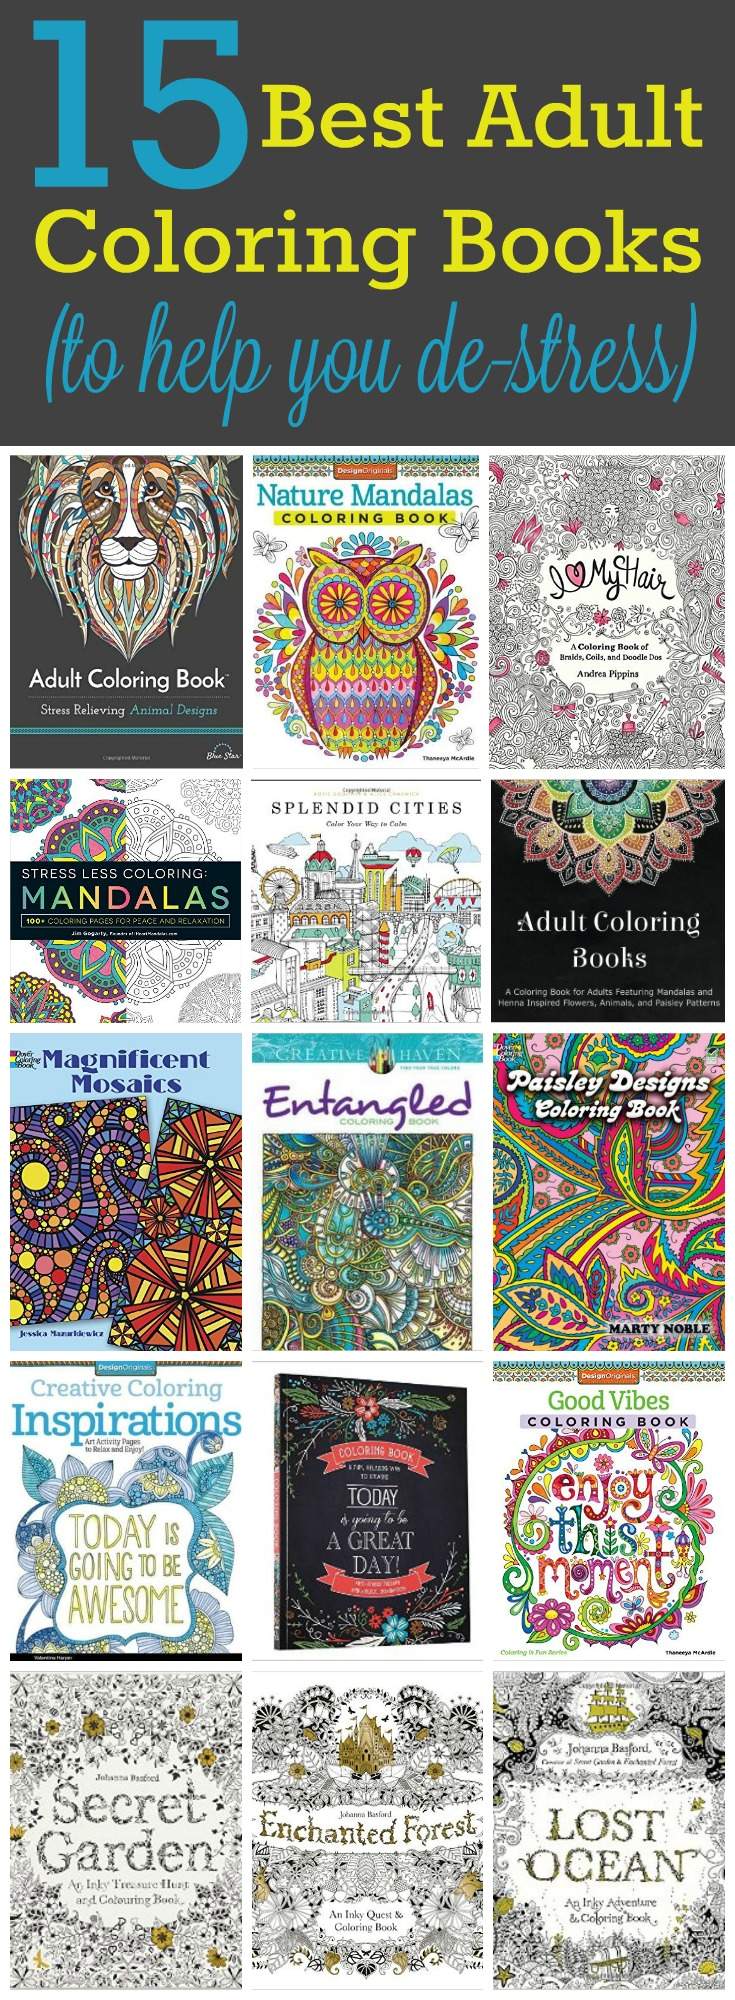 15 Best Adult Coloring Books